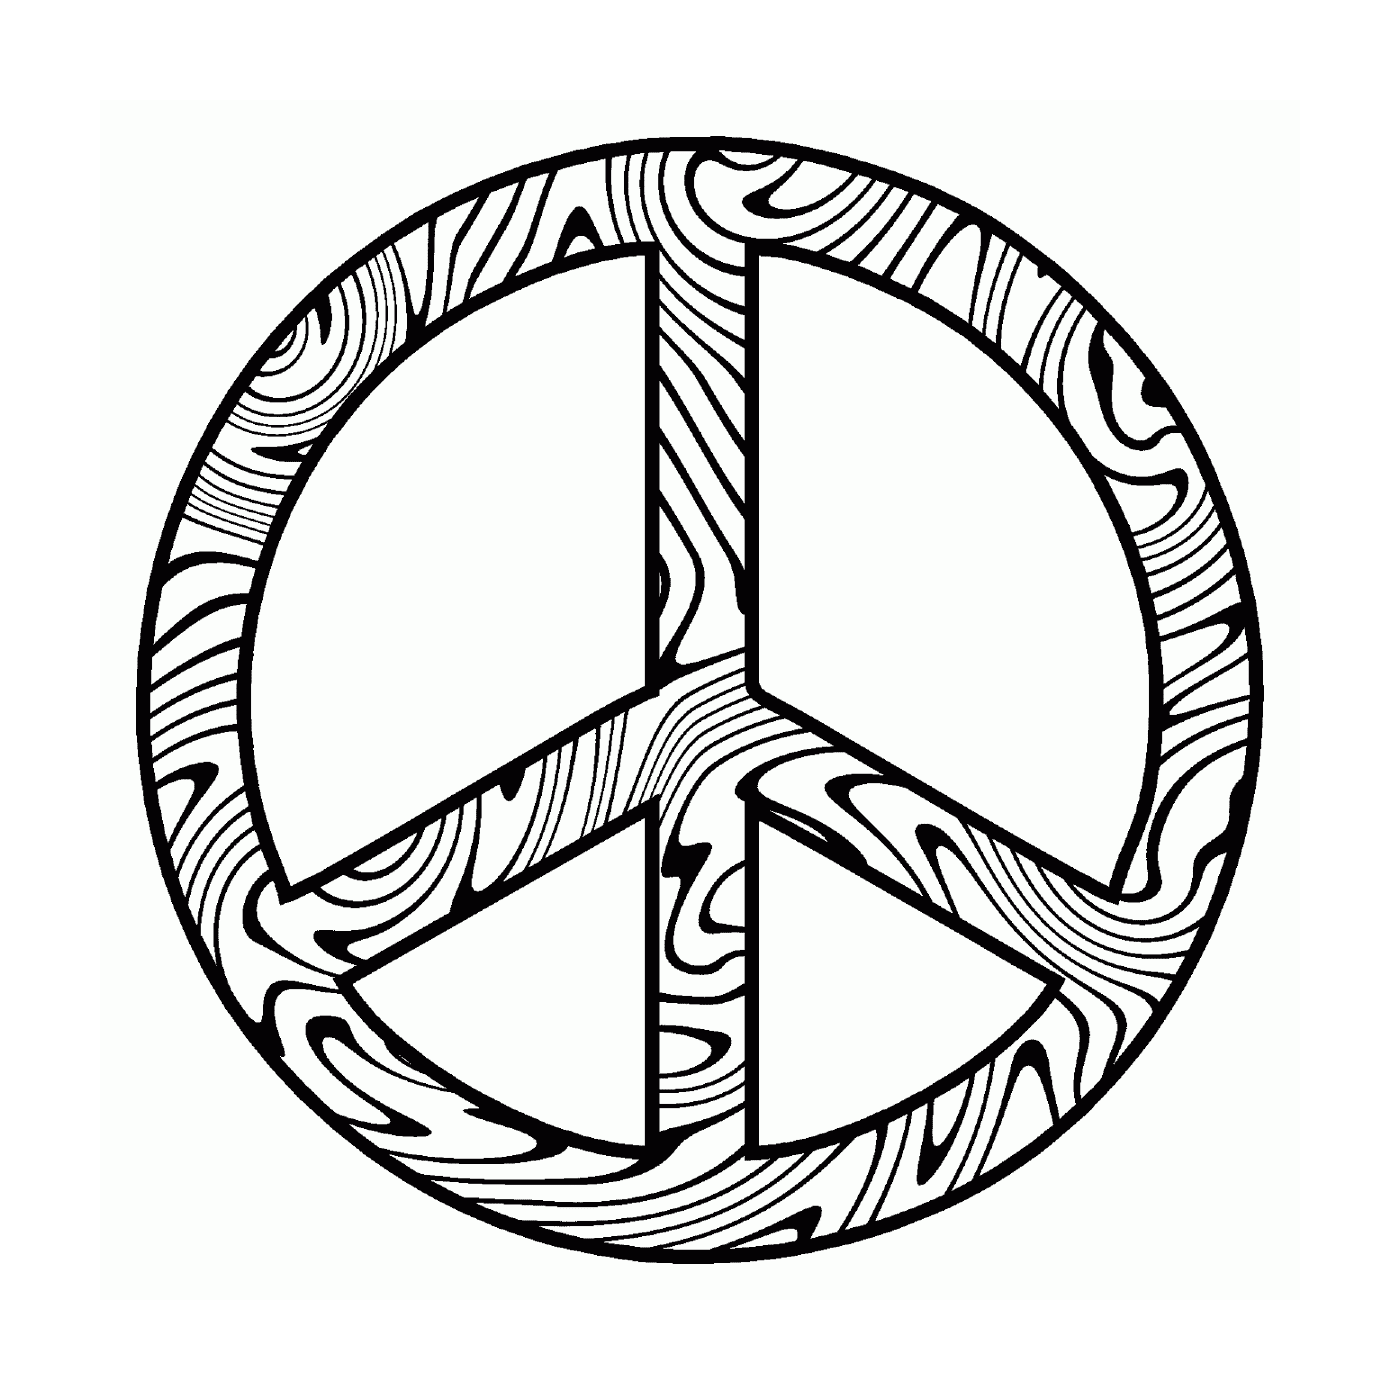  Abstract symbol of peace 